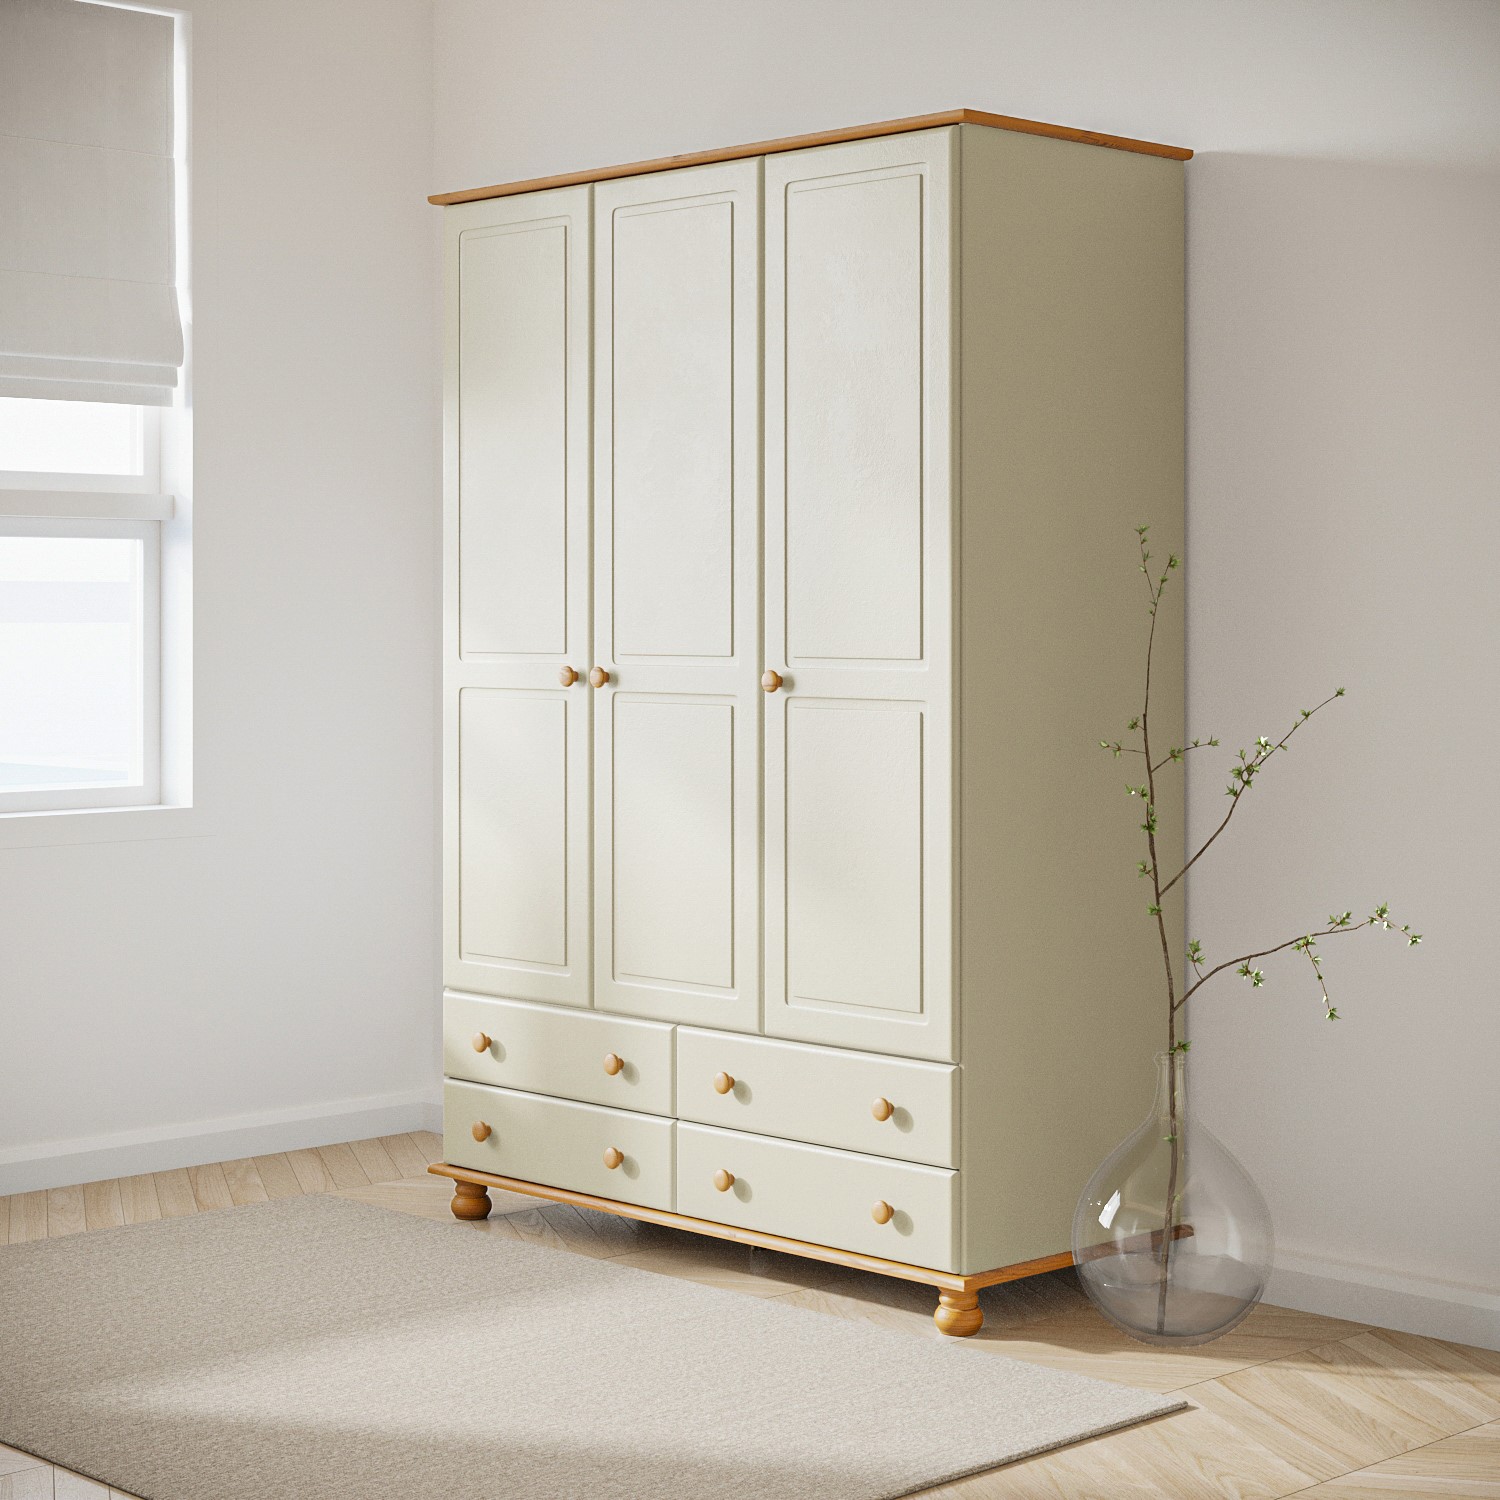 3 Door Wardrobe with Drawers in Cream and Pine - Hamilton